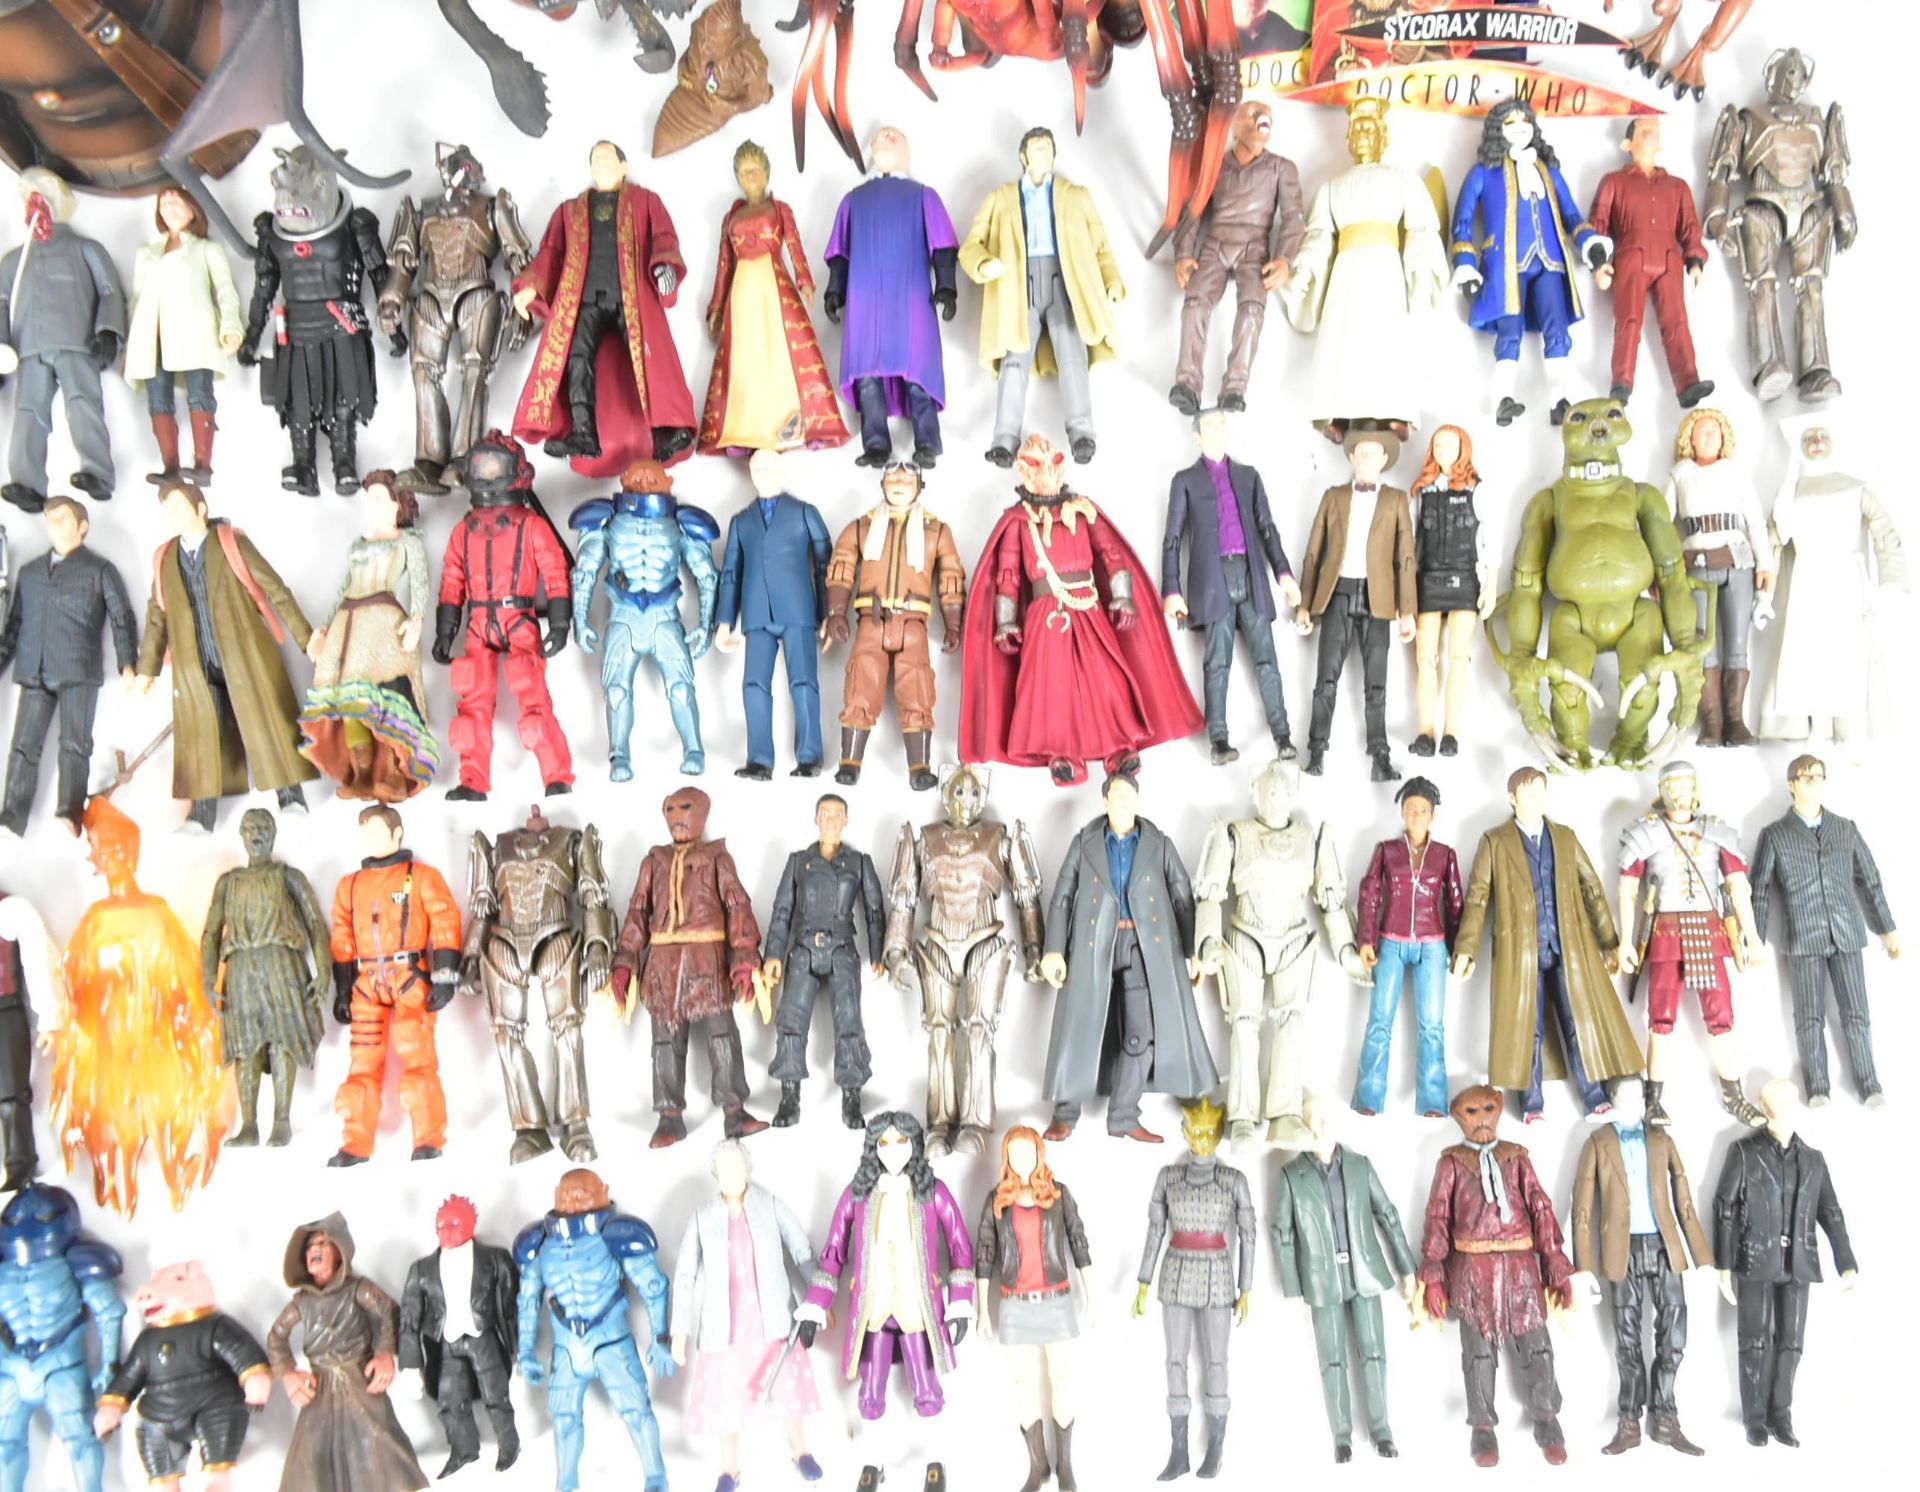 DOCTOR WHO - CHARACTER OPTIONS - ACTION FIGURES - Image 4 of 10